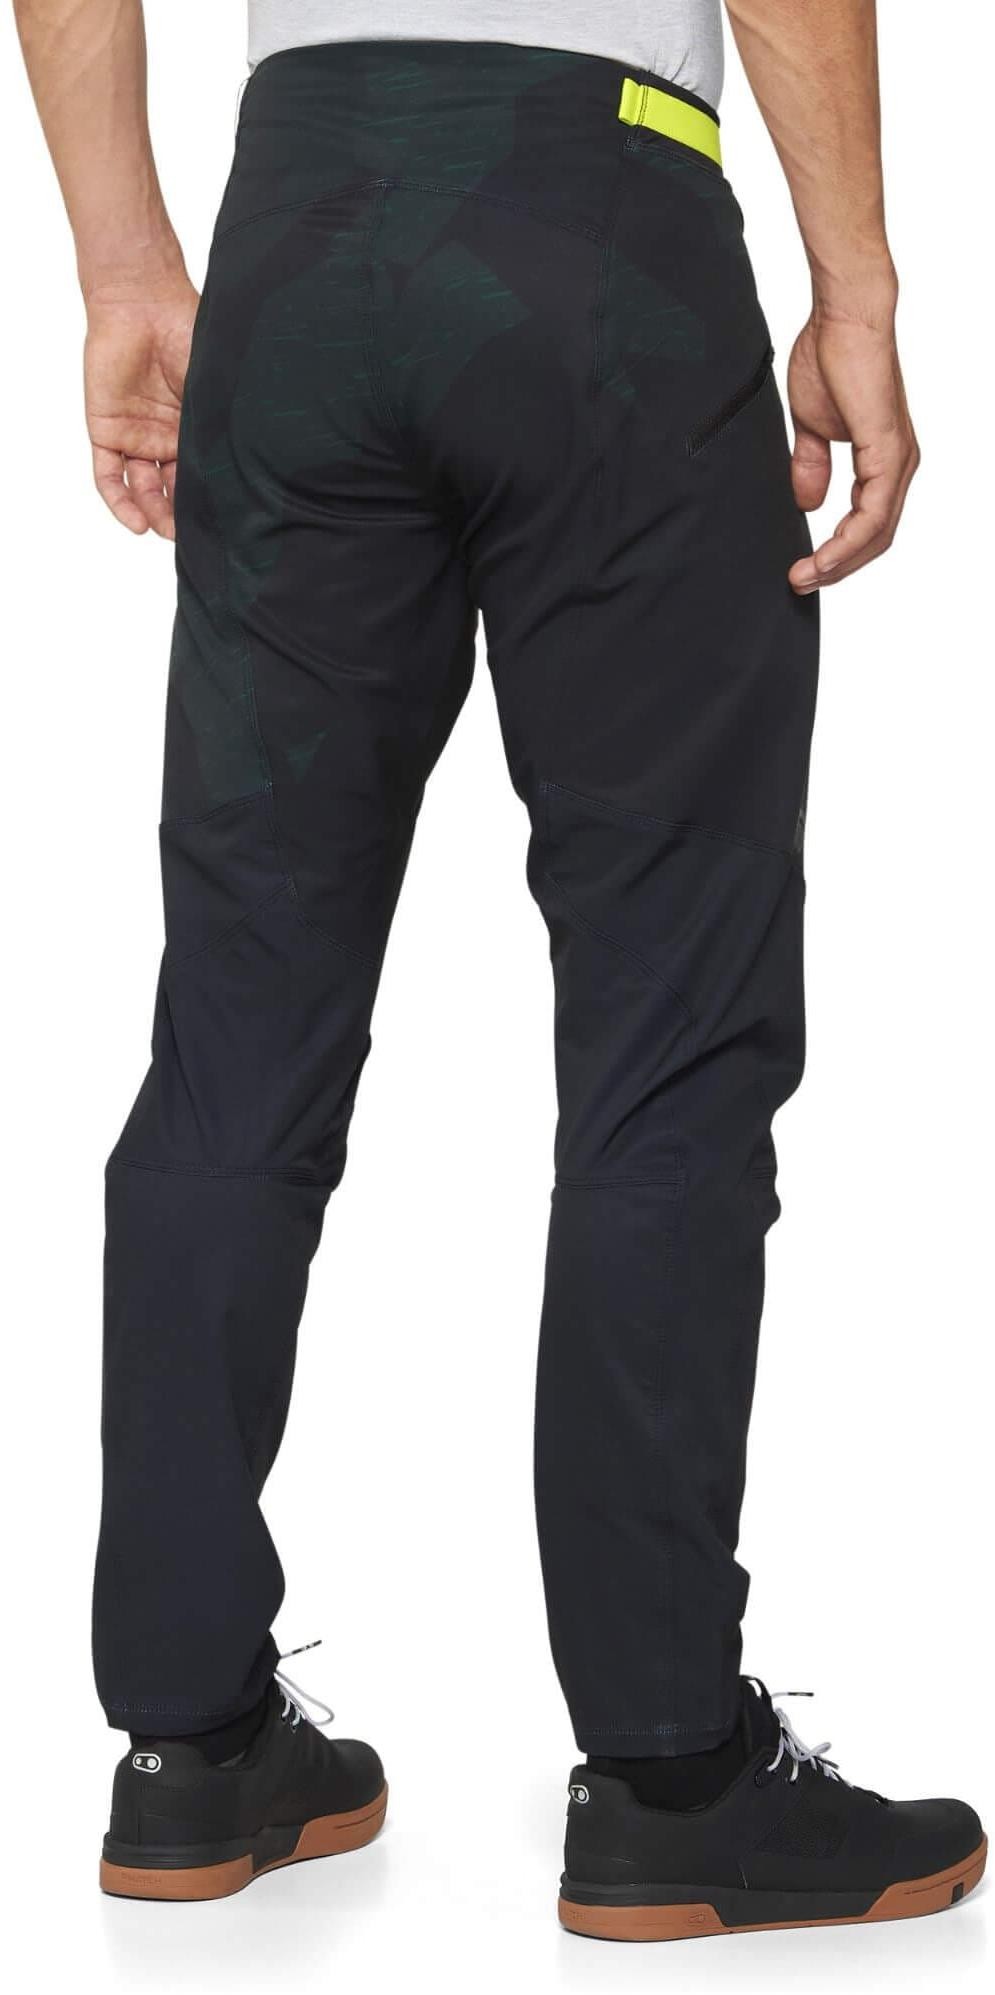 Airmatic LE MTB Cycling Trousers image 1